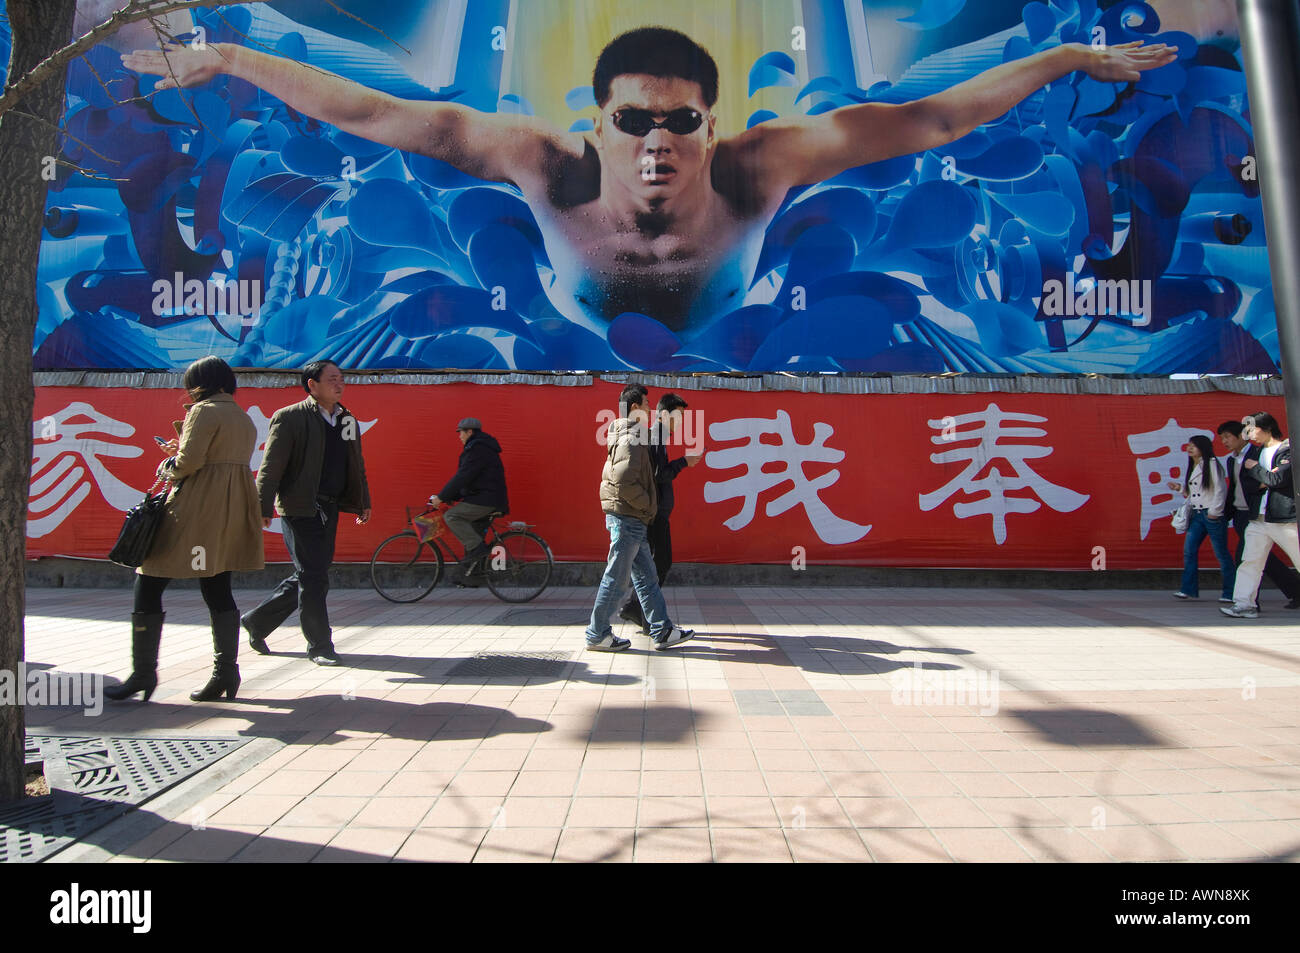 China's star swimmer Wu Peng appears on an advertising billboard in the Wanfushing shopping district of central Beijing Stock Photo